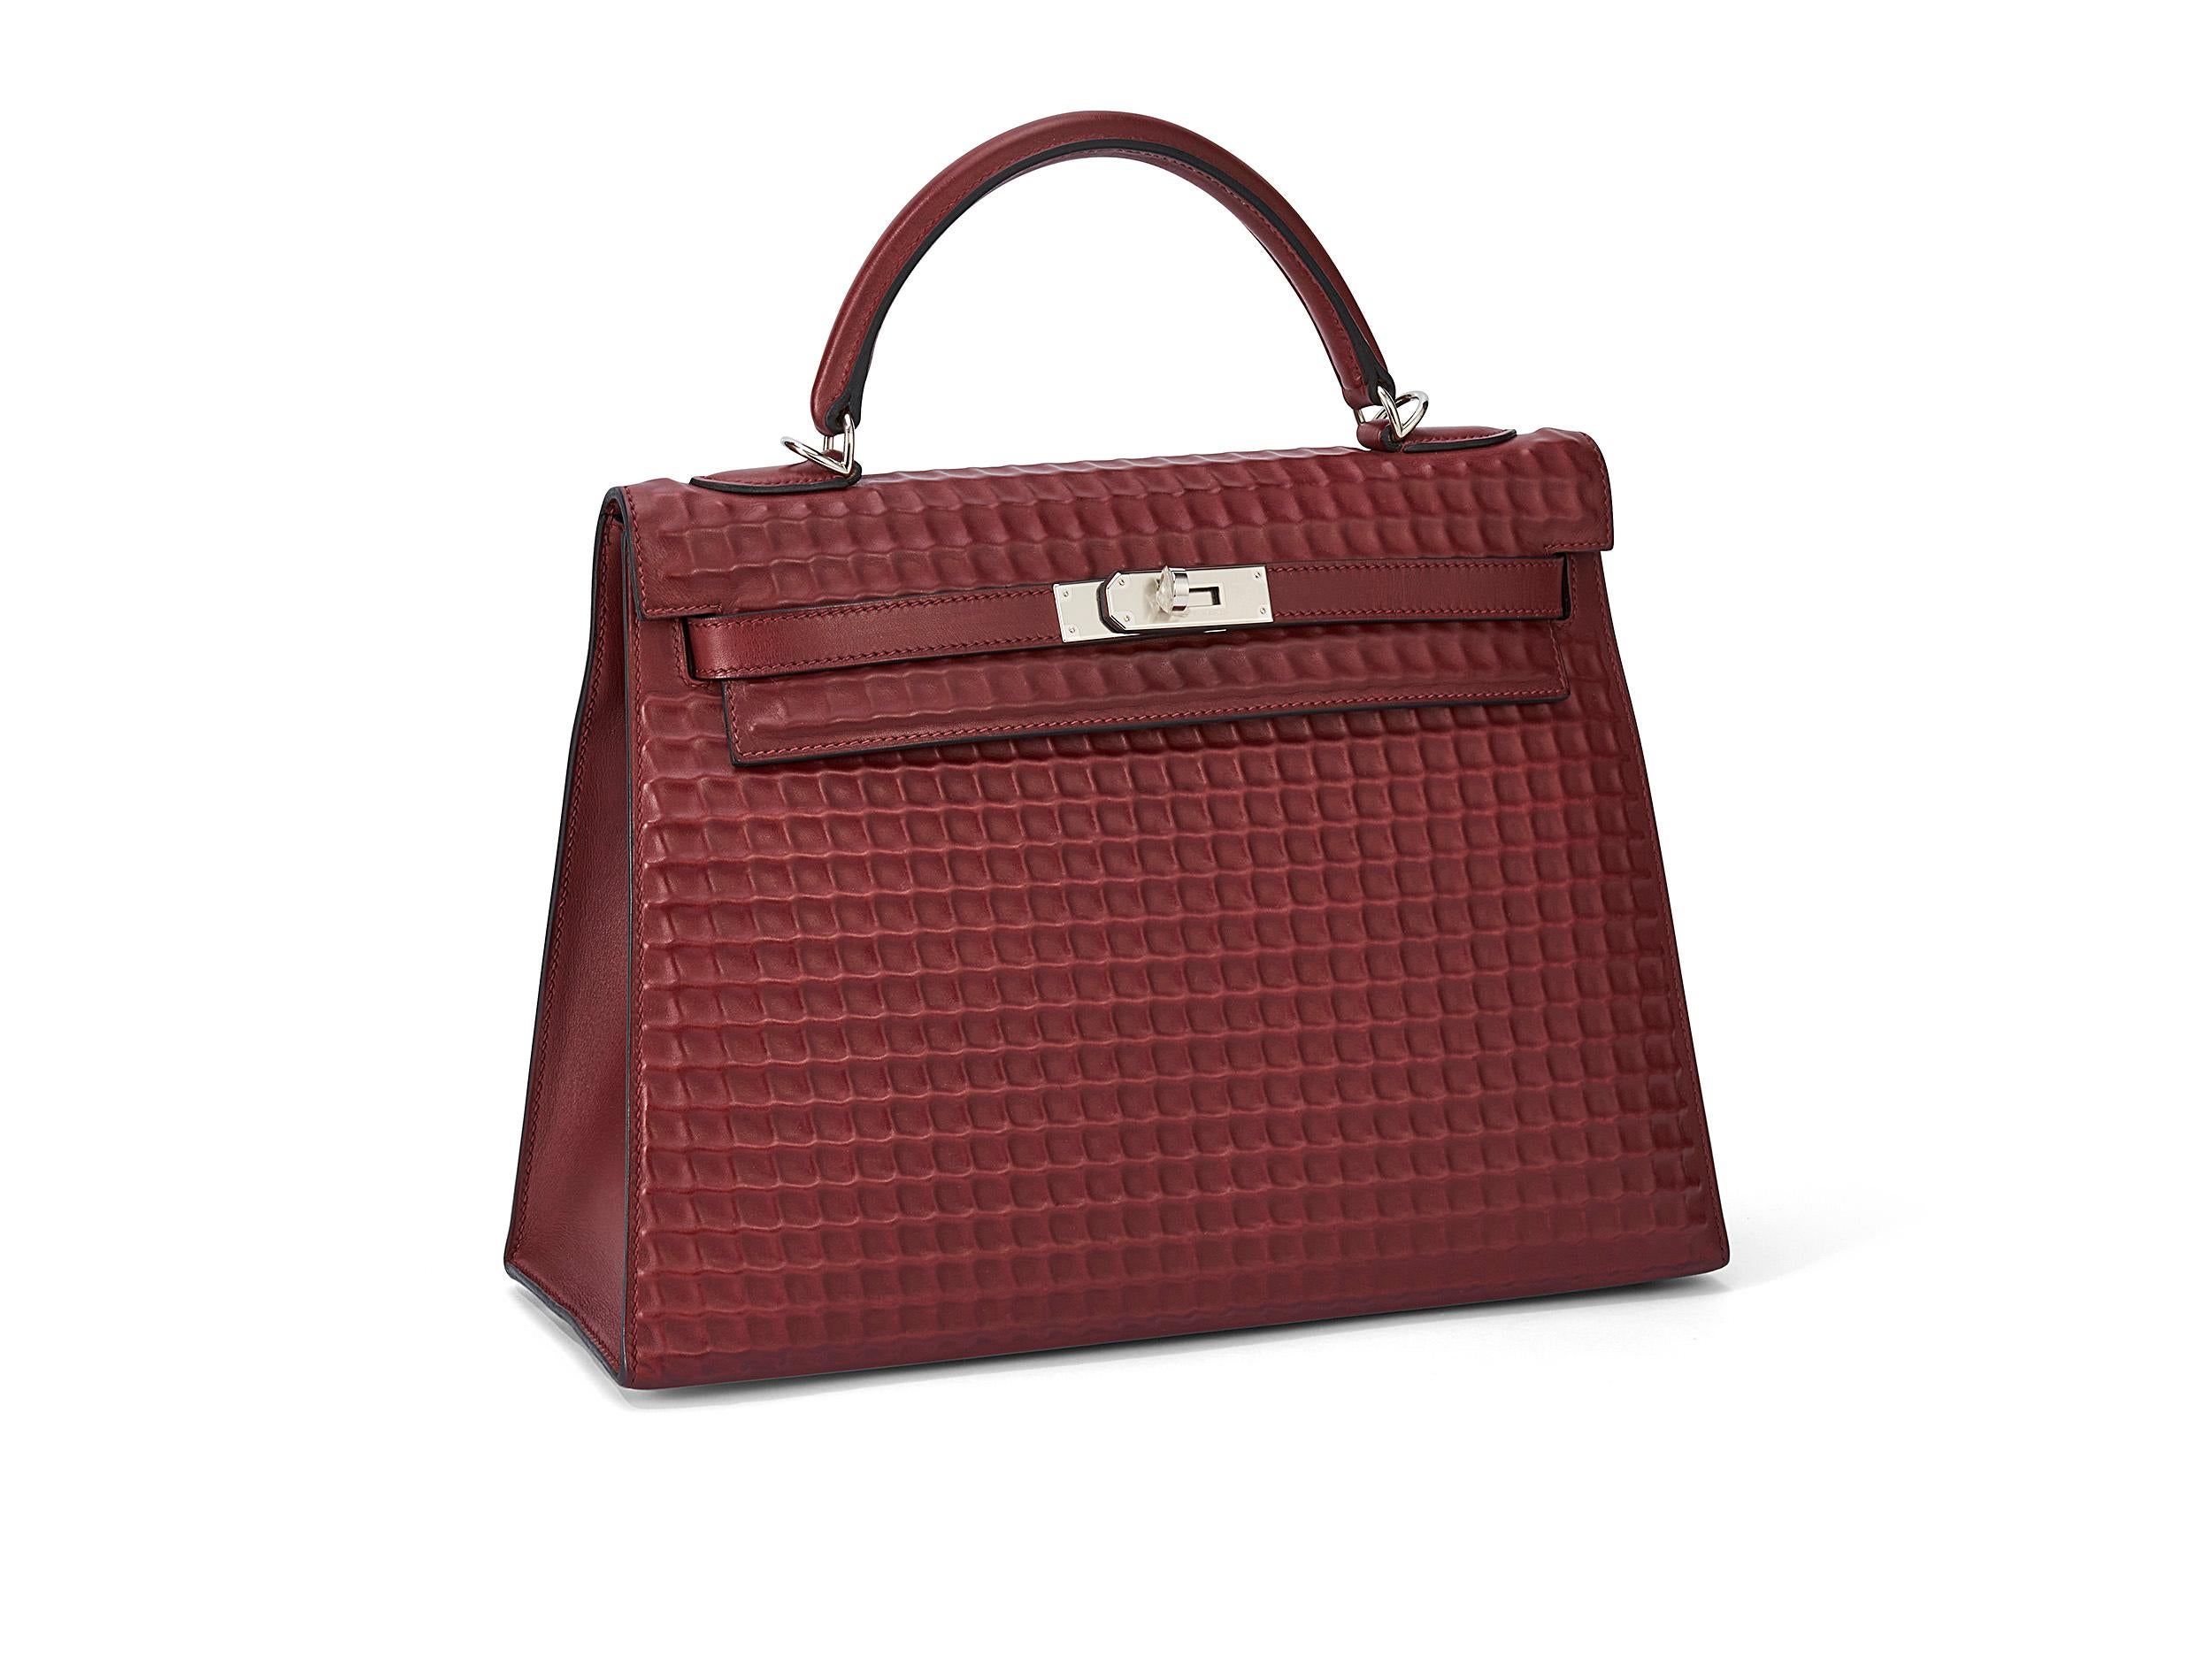 Hermès Kelly Waffle Sellier 32 in rouge h and evercalf leather with palladium hardware. The bag is in good condition but shows some signs of wear: minor scratches almost not visible on the front and back side, a pen stain on the inside of the bag,